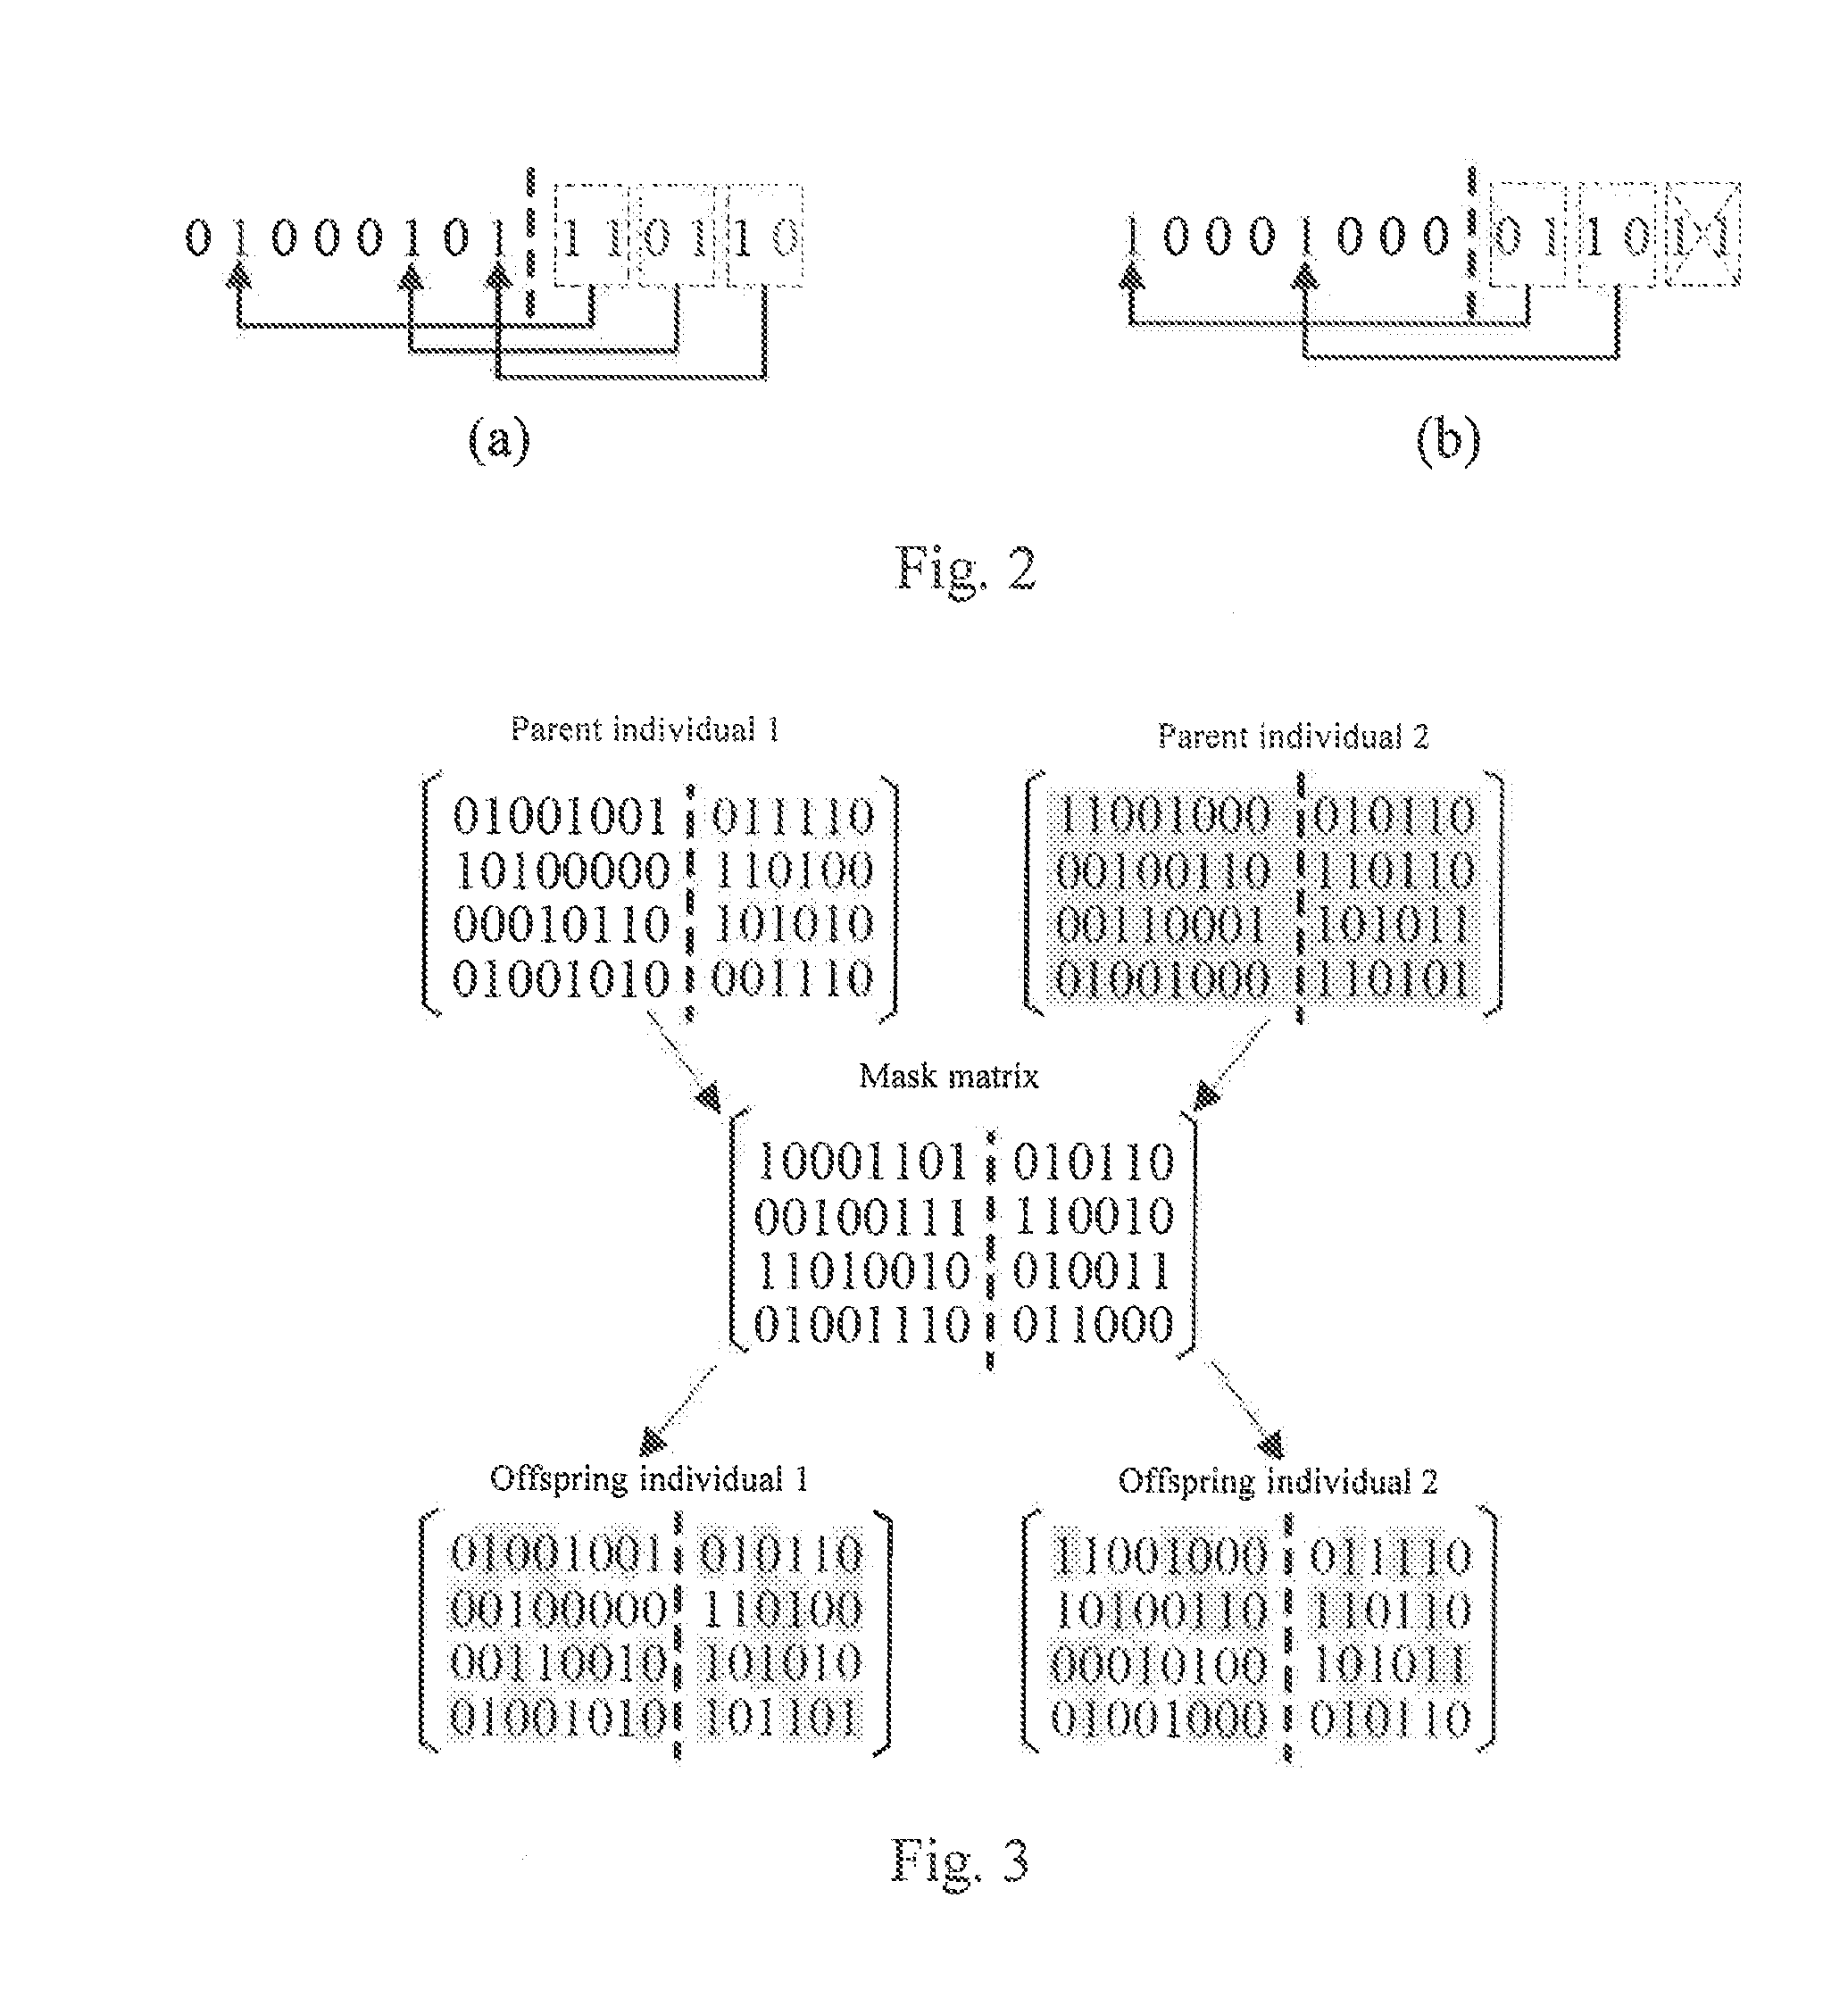 Method for joint optimization of schedule and resource allocation based on the genetic algorithm